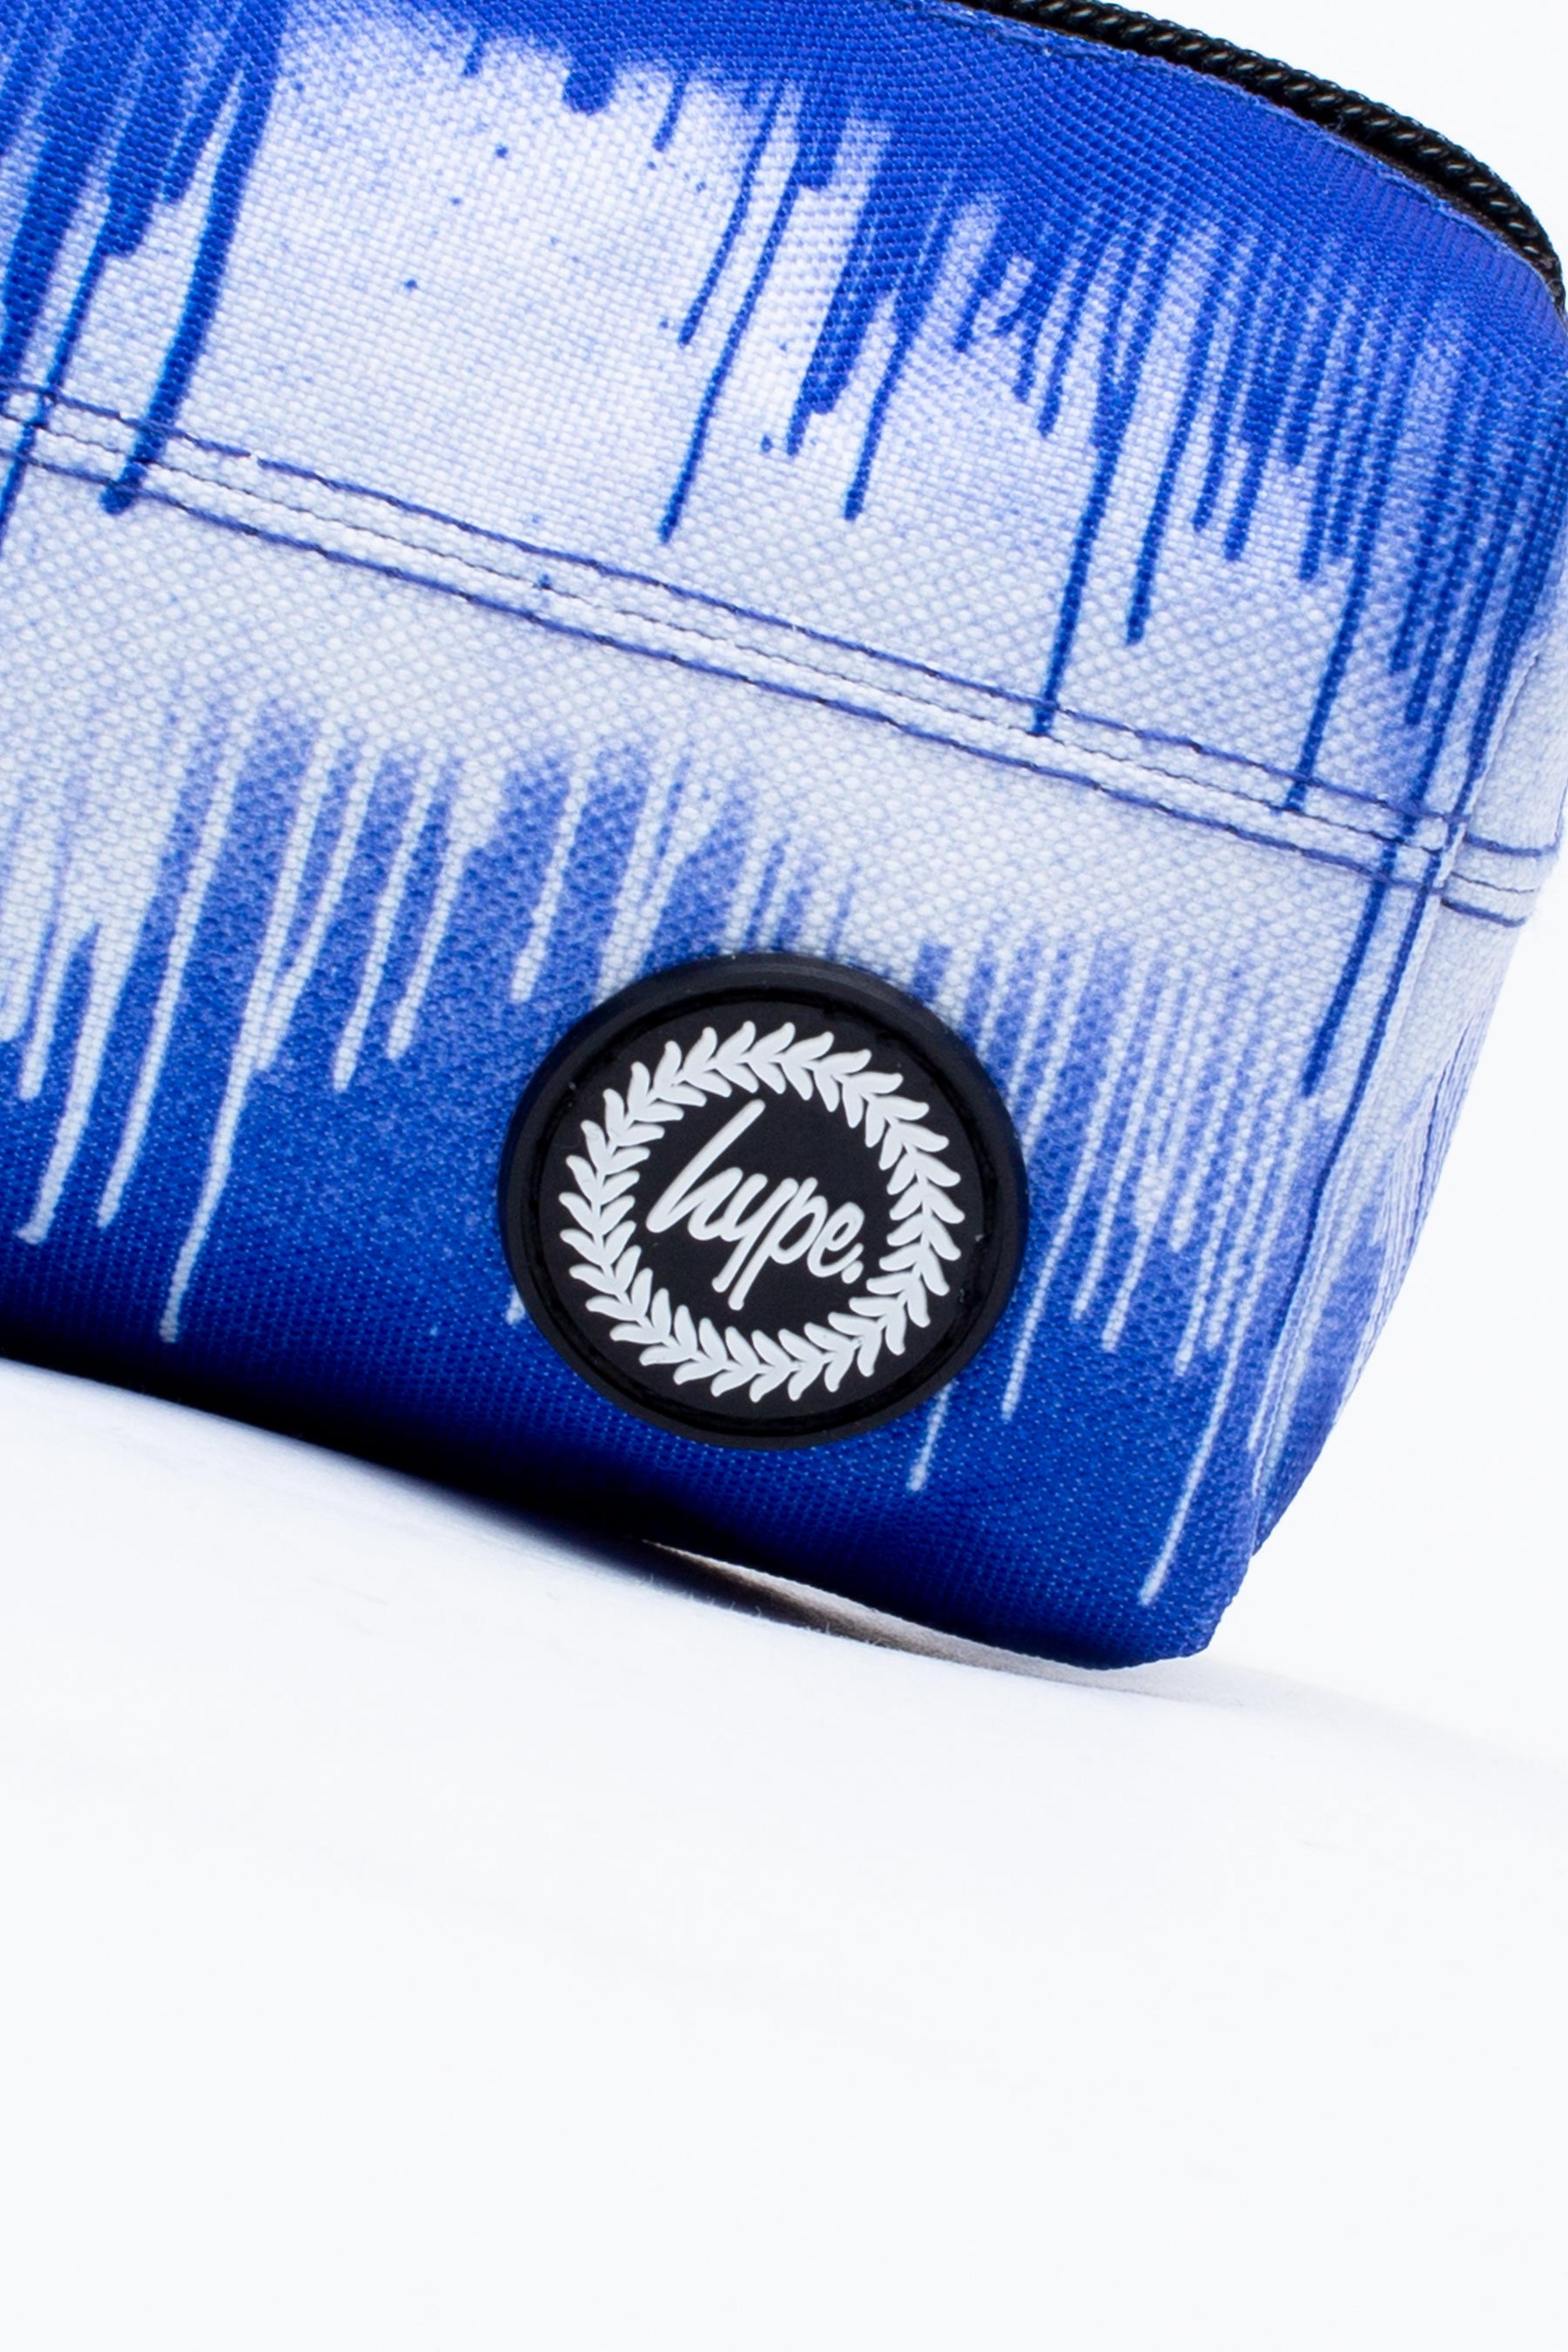 Alternate View 2 of HYPE ROYAL BLUE SINGLE DRIP PENCIL CASE